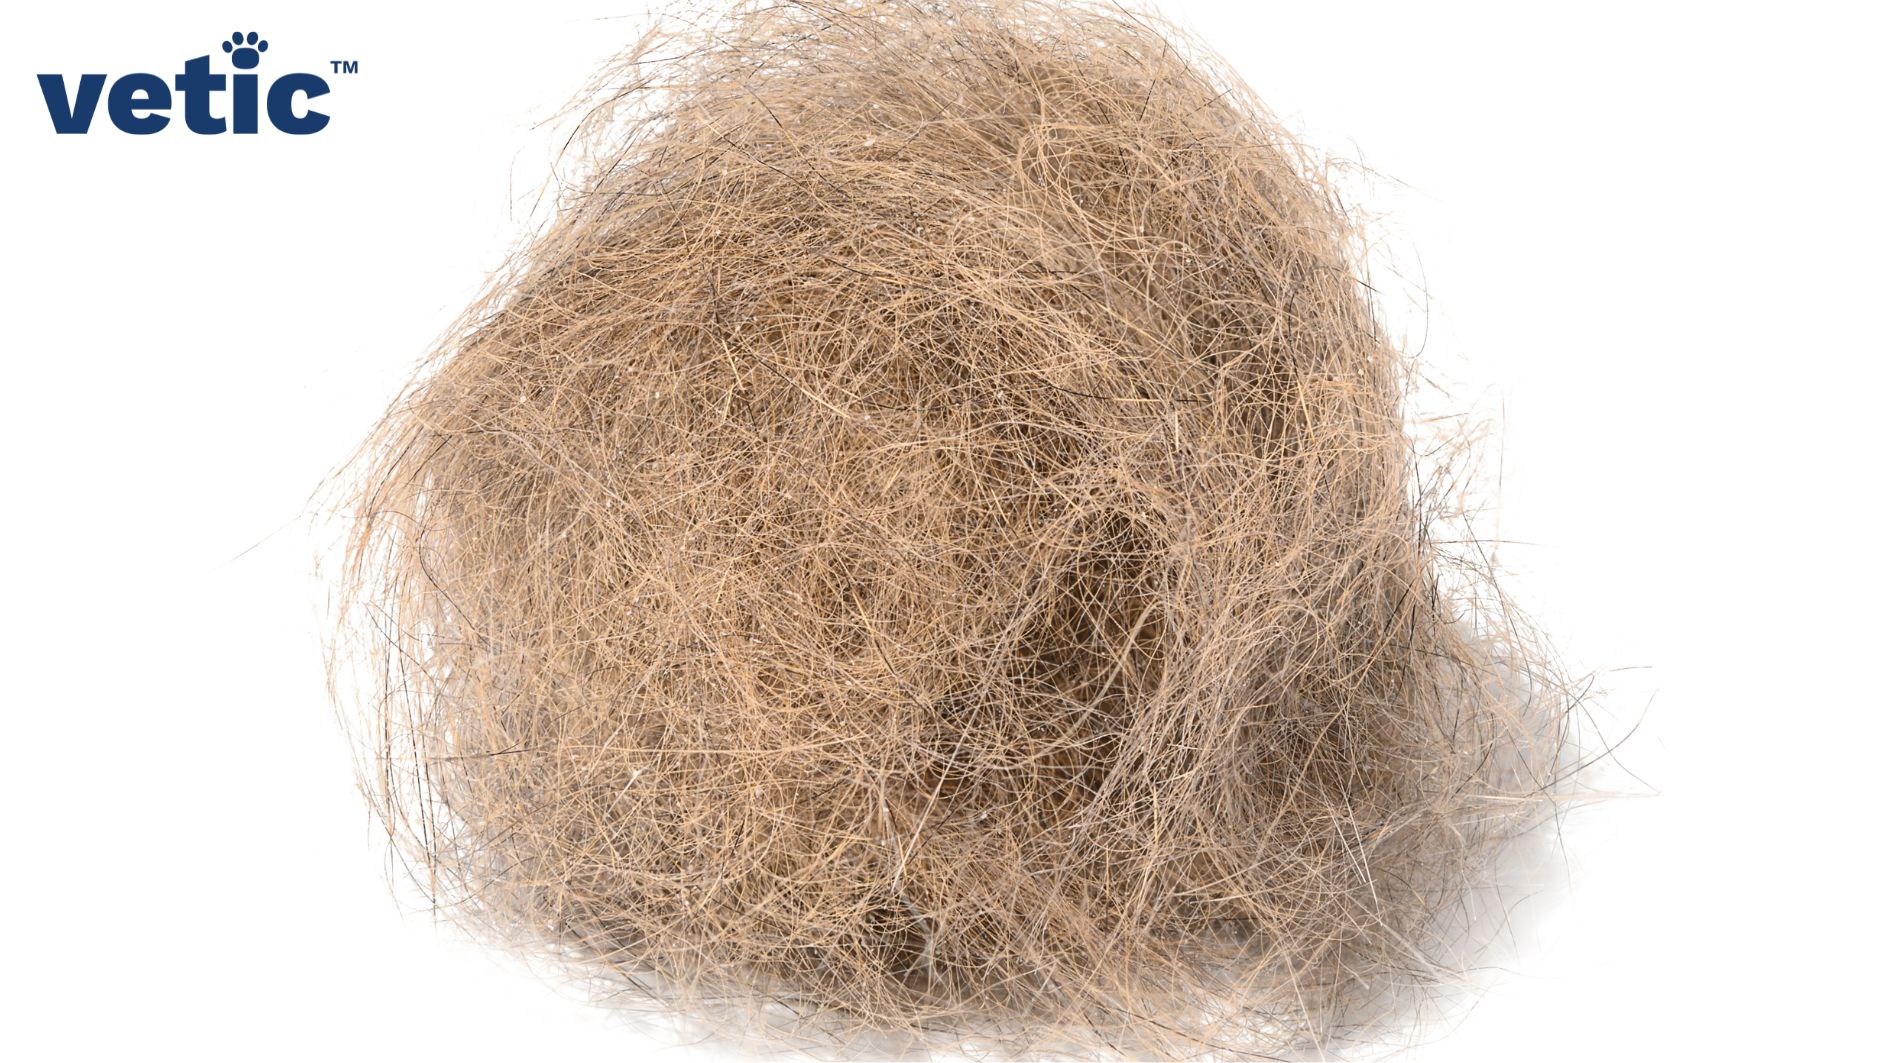 a single cat hairball of orange-ish brown colour